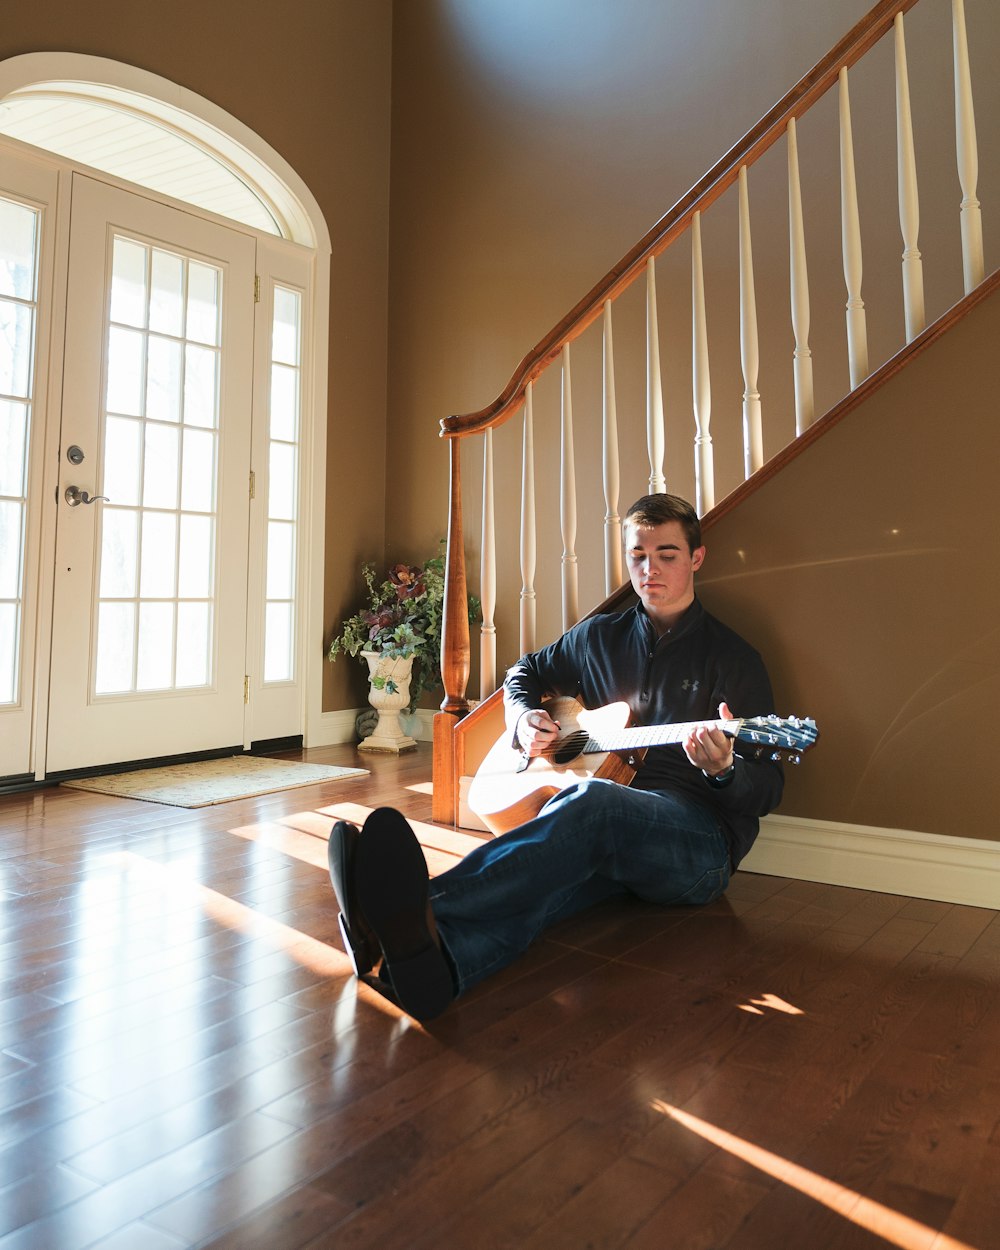 man playing guitar leaning on stairs